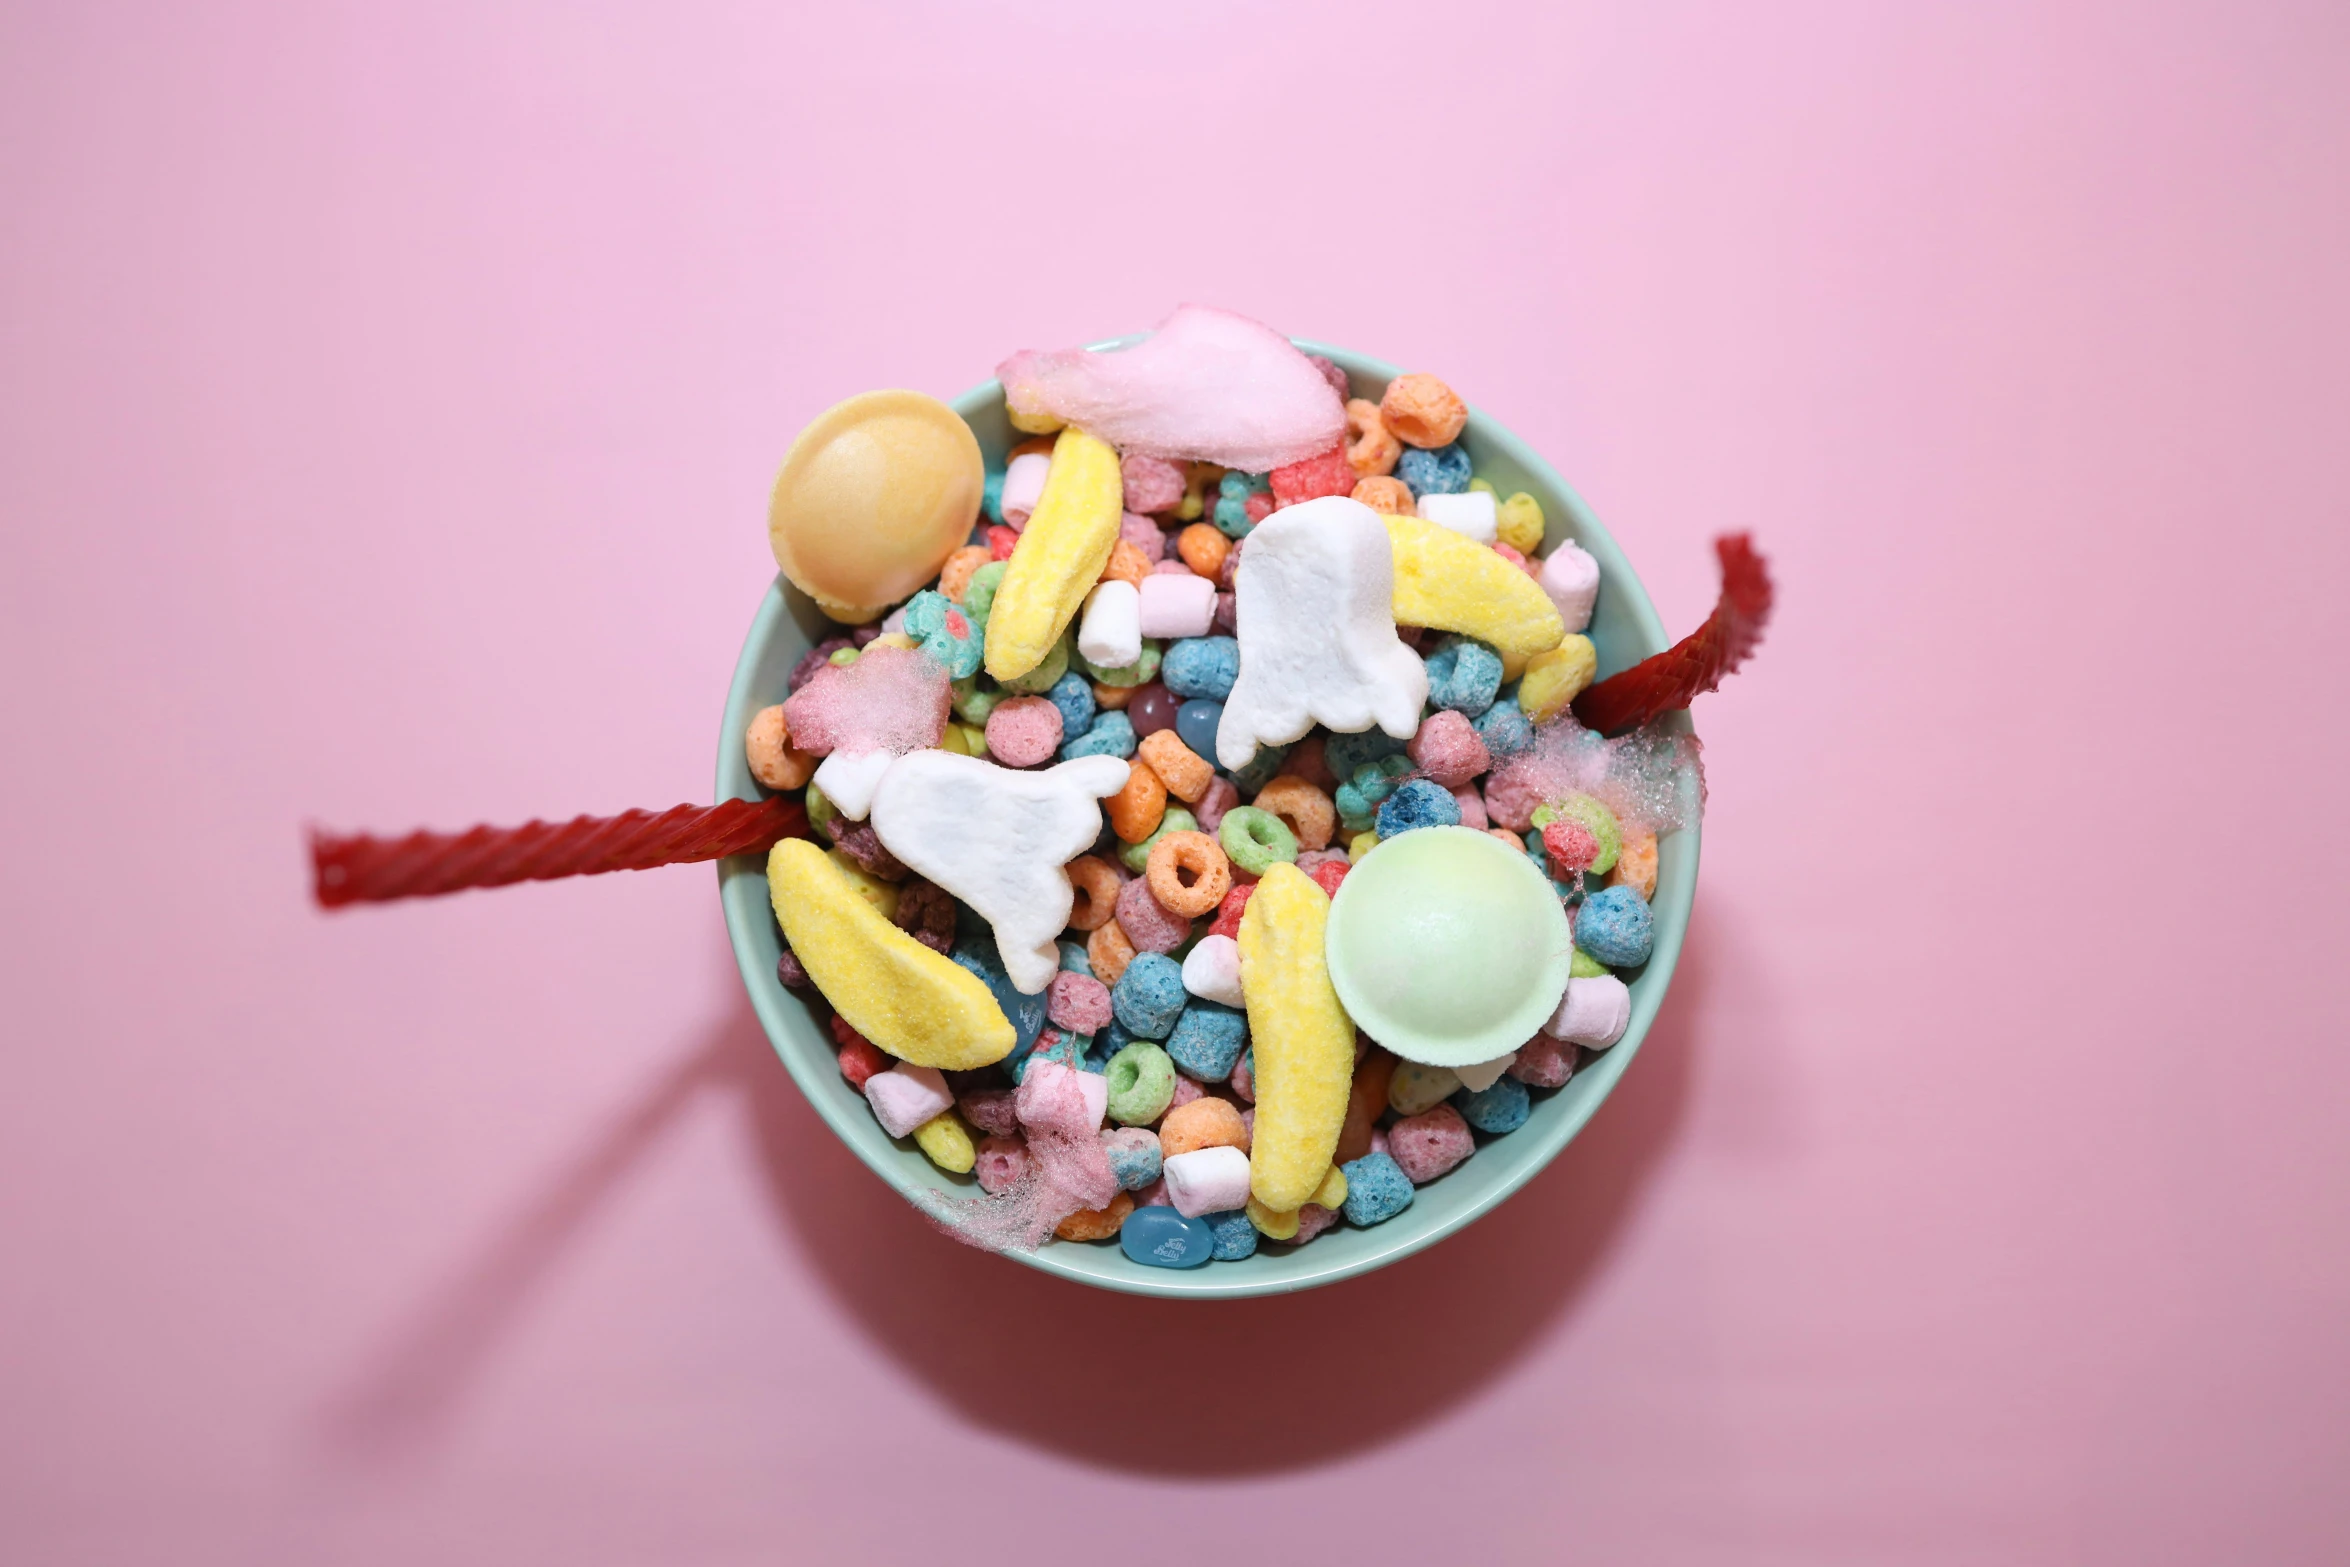 a bowl of cereal and ice cream on a pink surface